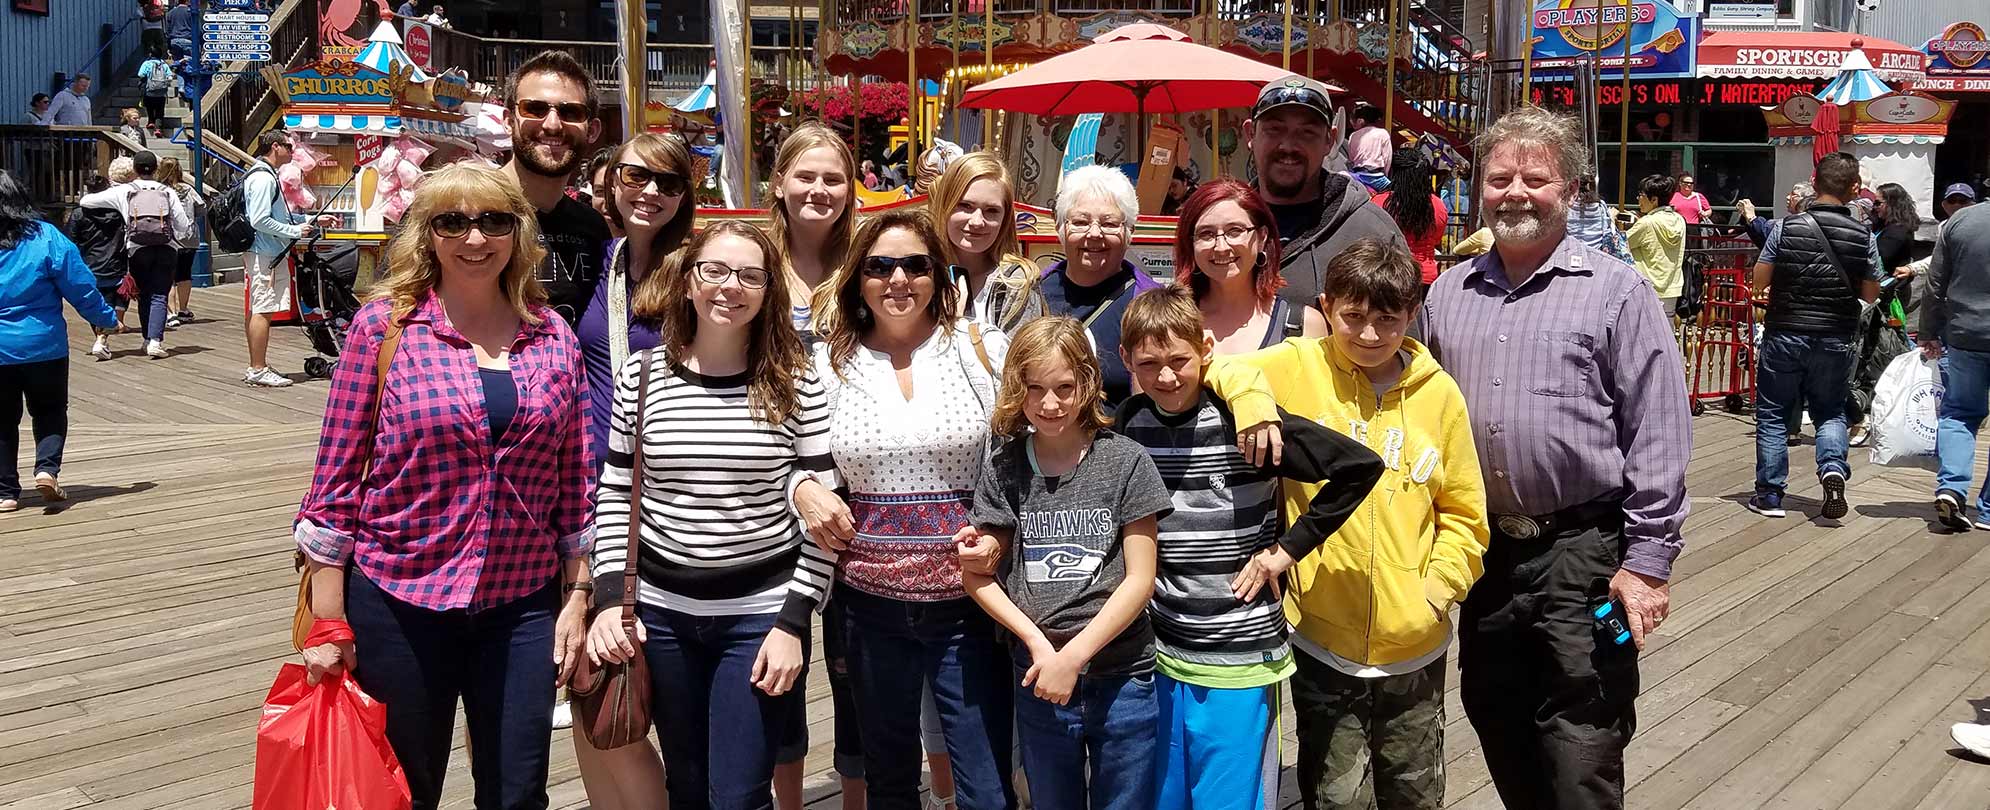 A family of 14 people poses for a picture on a busy boardwalk.